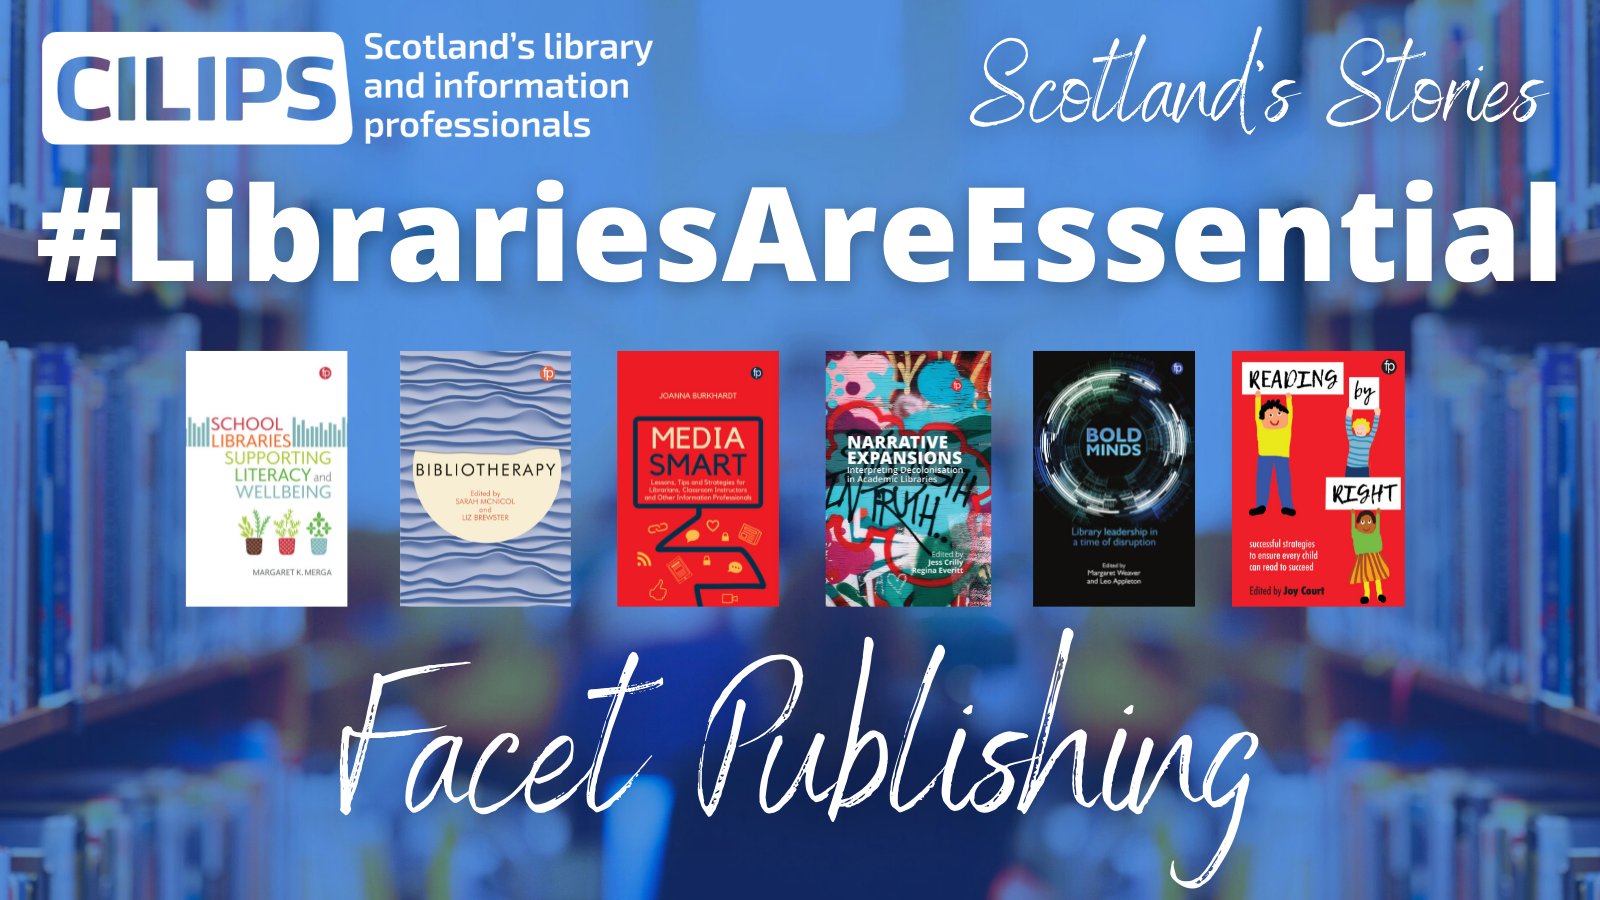 The #LibrariesAreEssential - Scotland's Stories 'Facet Publishing' logo, with white text on a blue library background and a series of Facet book covers.